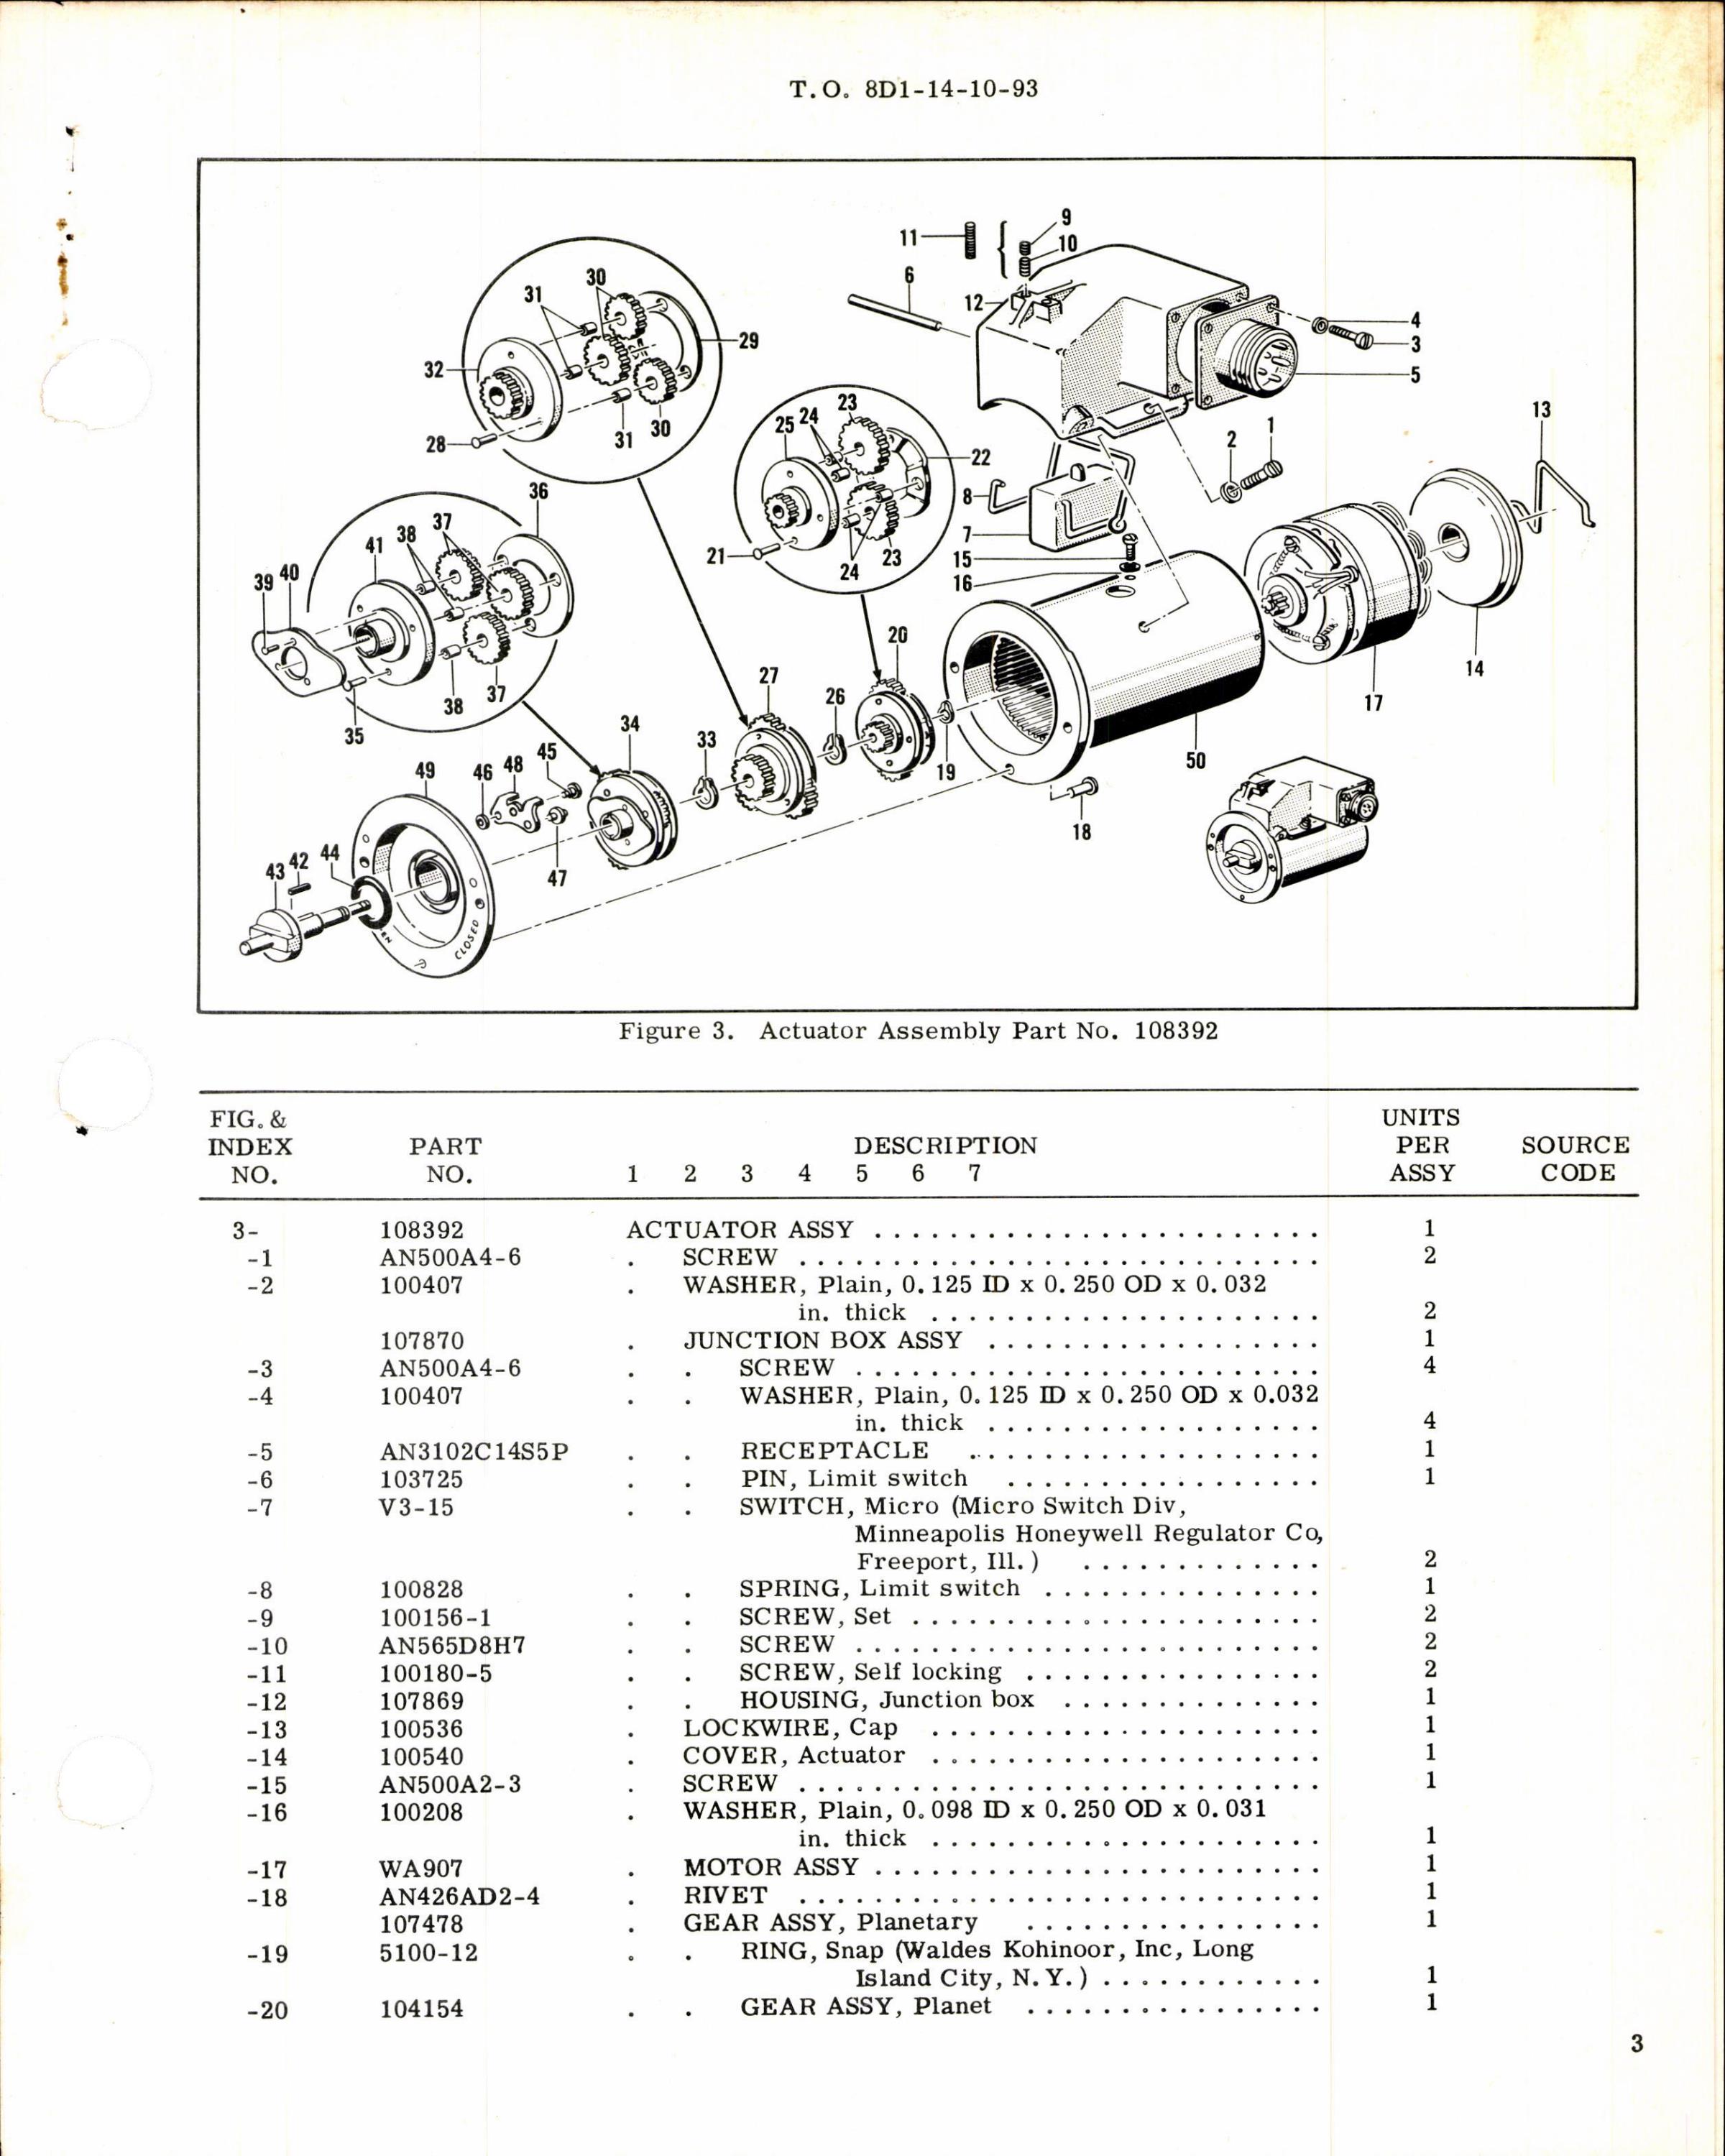 Sample page 3 from AirCorps Library document: Instructions w Parts Breakdown for Actuator Assembly Part 108392